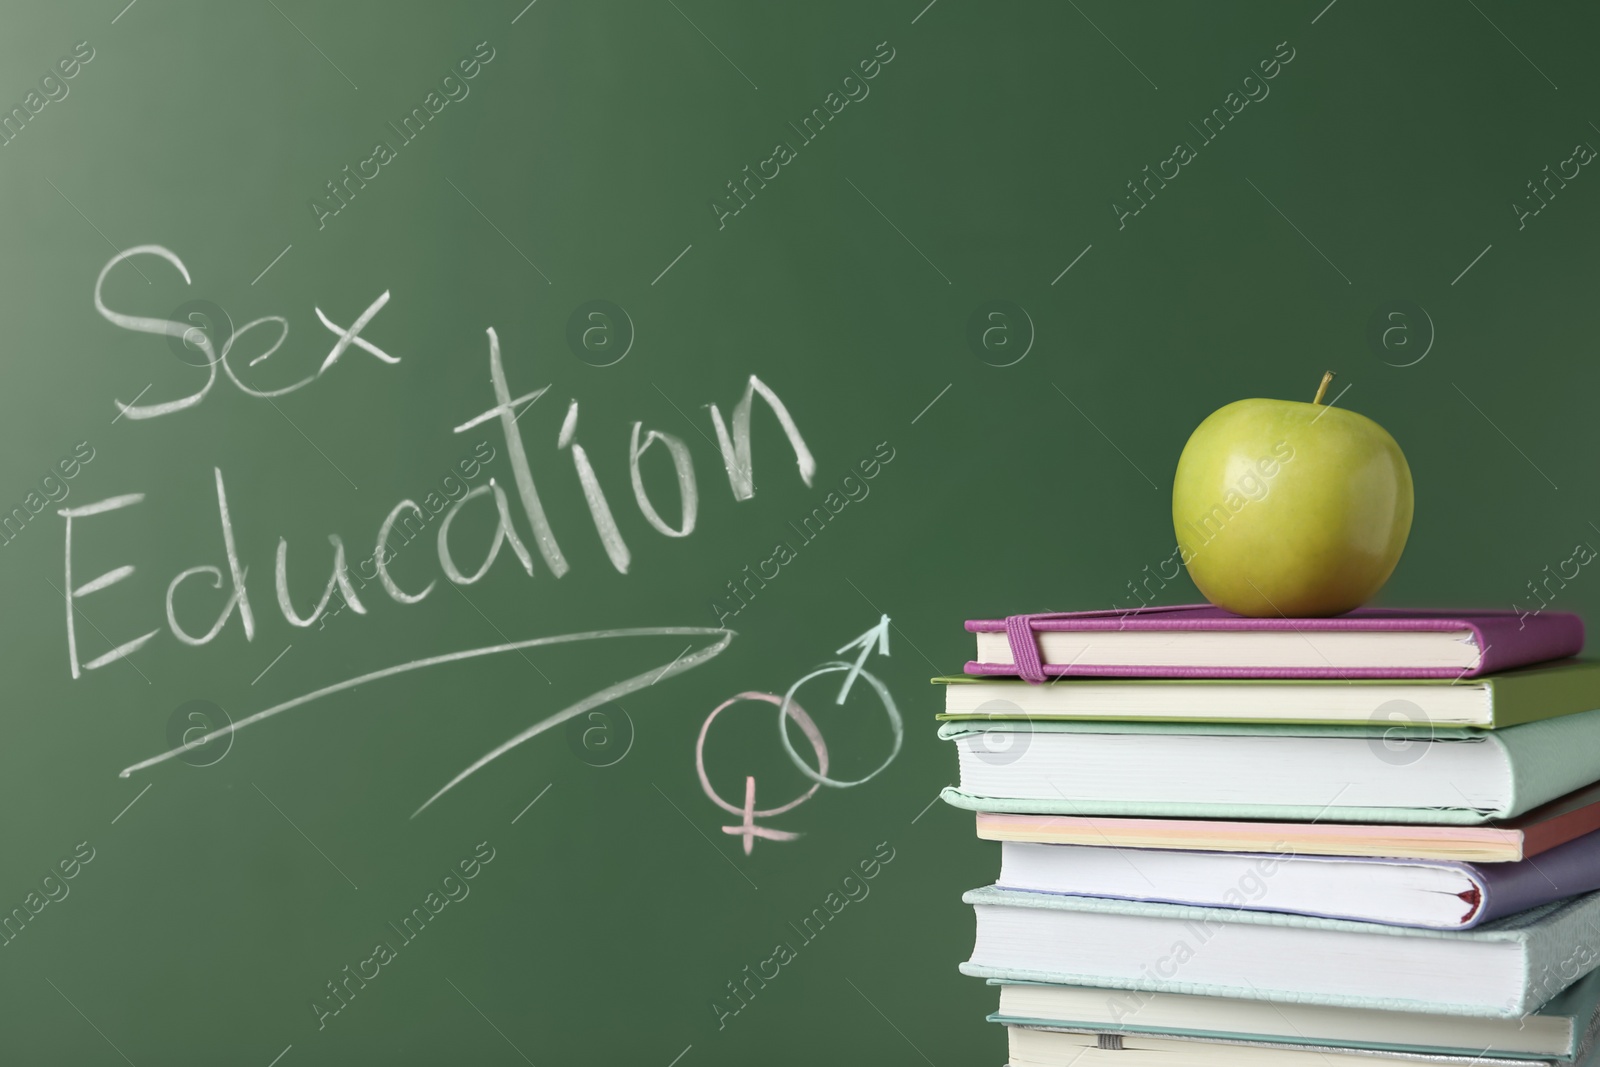 Photo of Books and apple near chalkboard with phrase "Sex education"